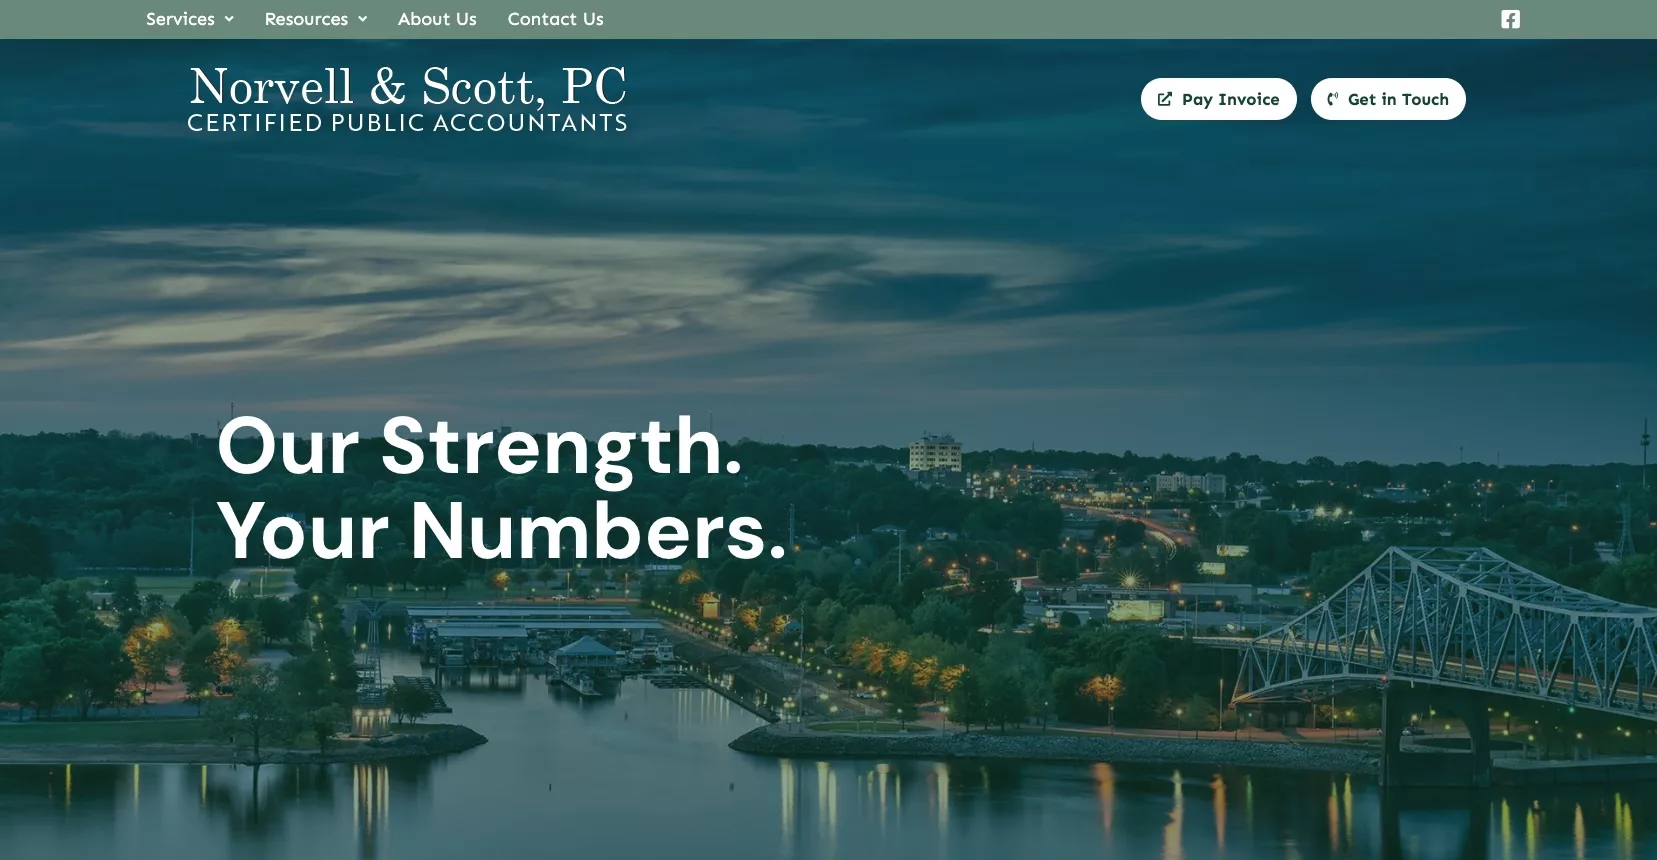 Featured image for “Norvell & Scott Accountants”